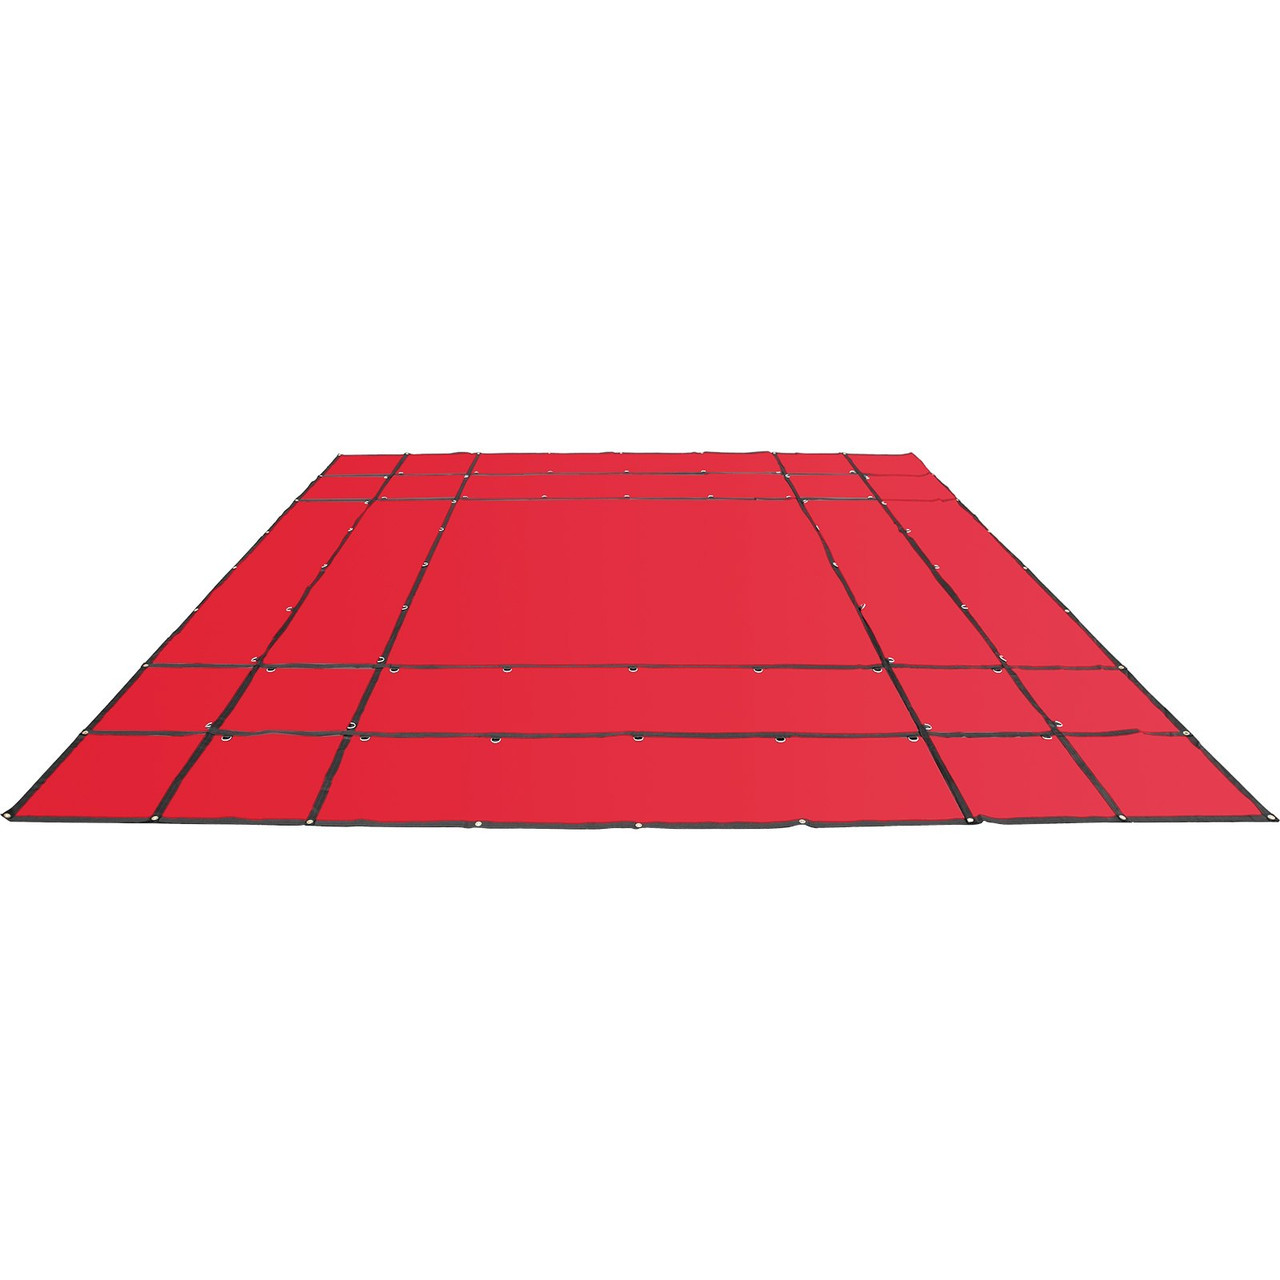 Flatbed Tarps, 18OZ Flatbed Truck Tarp, 16x24 Ft Polyethylene Lumber Tarp, Red Heavy Duty Trailer Tarp with Stainless Steel D Rings for Trucks, Vans, Small Boats, Machinery & Outdoor Materials